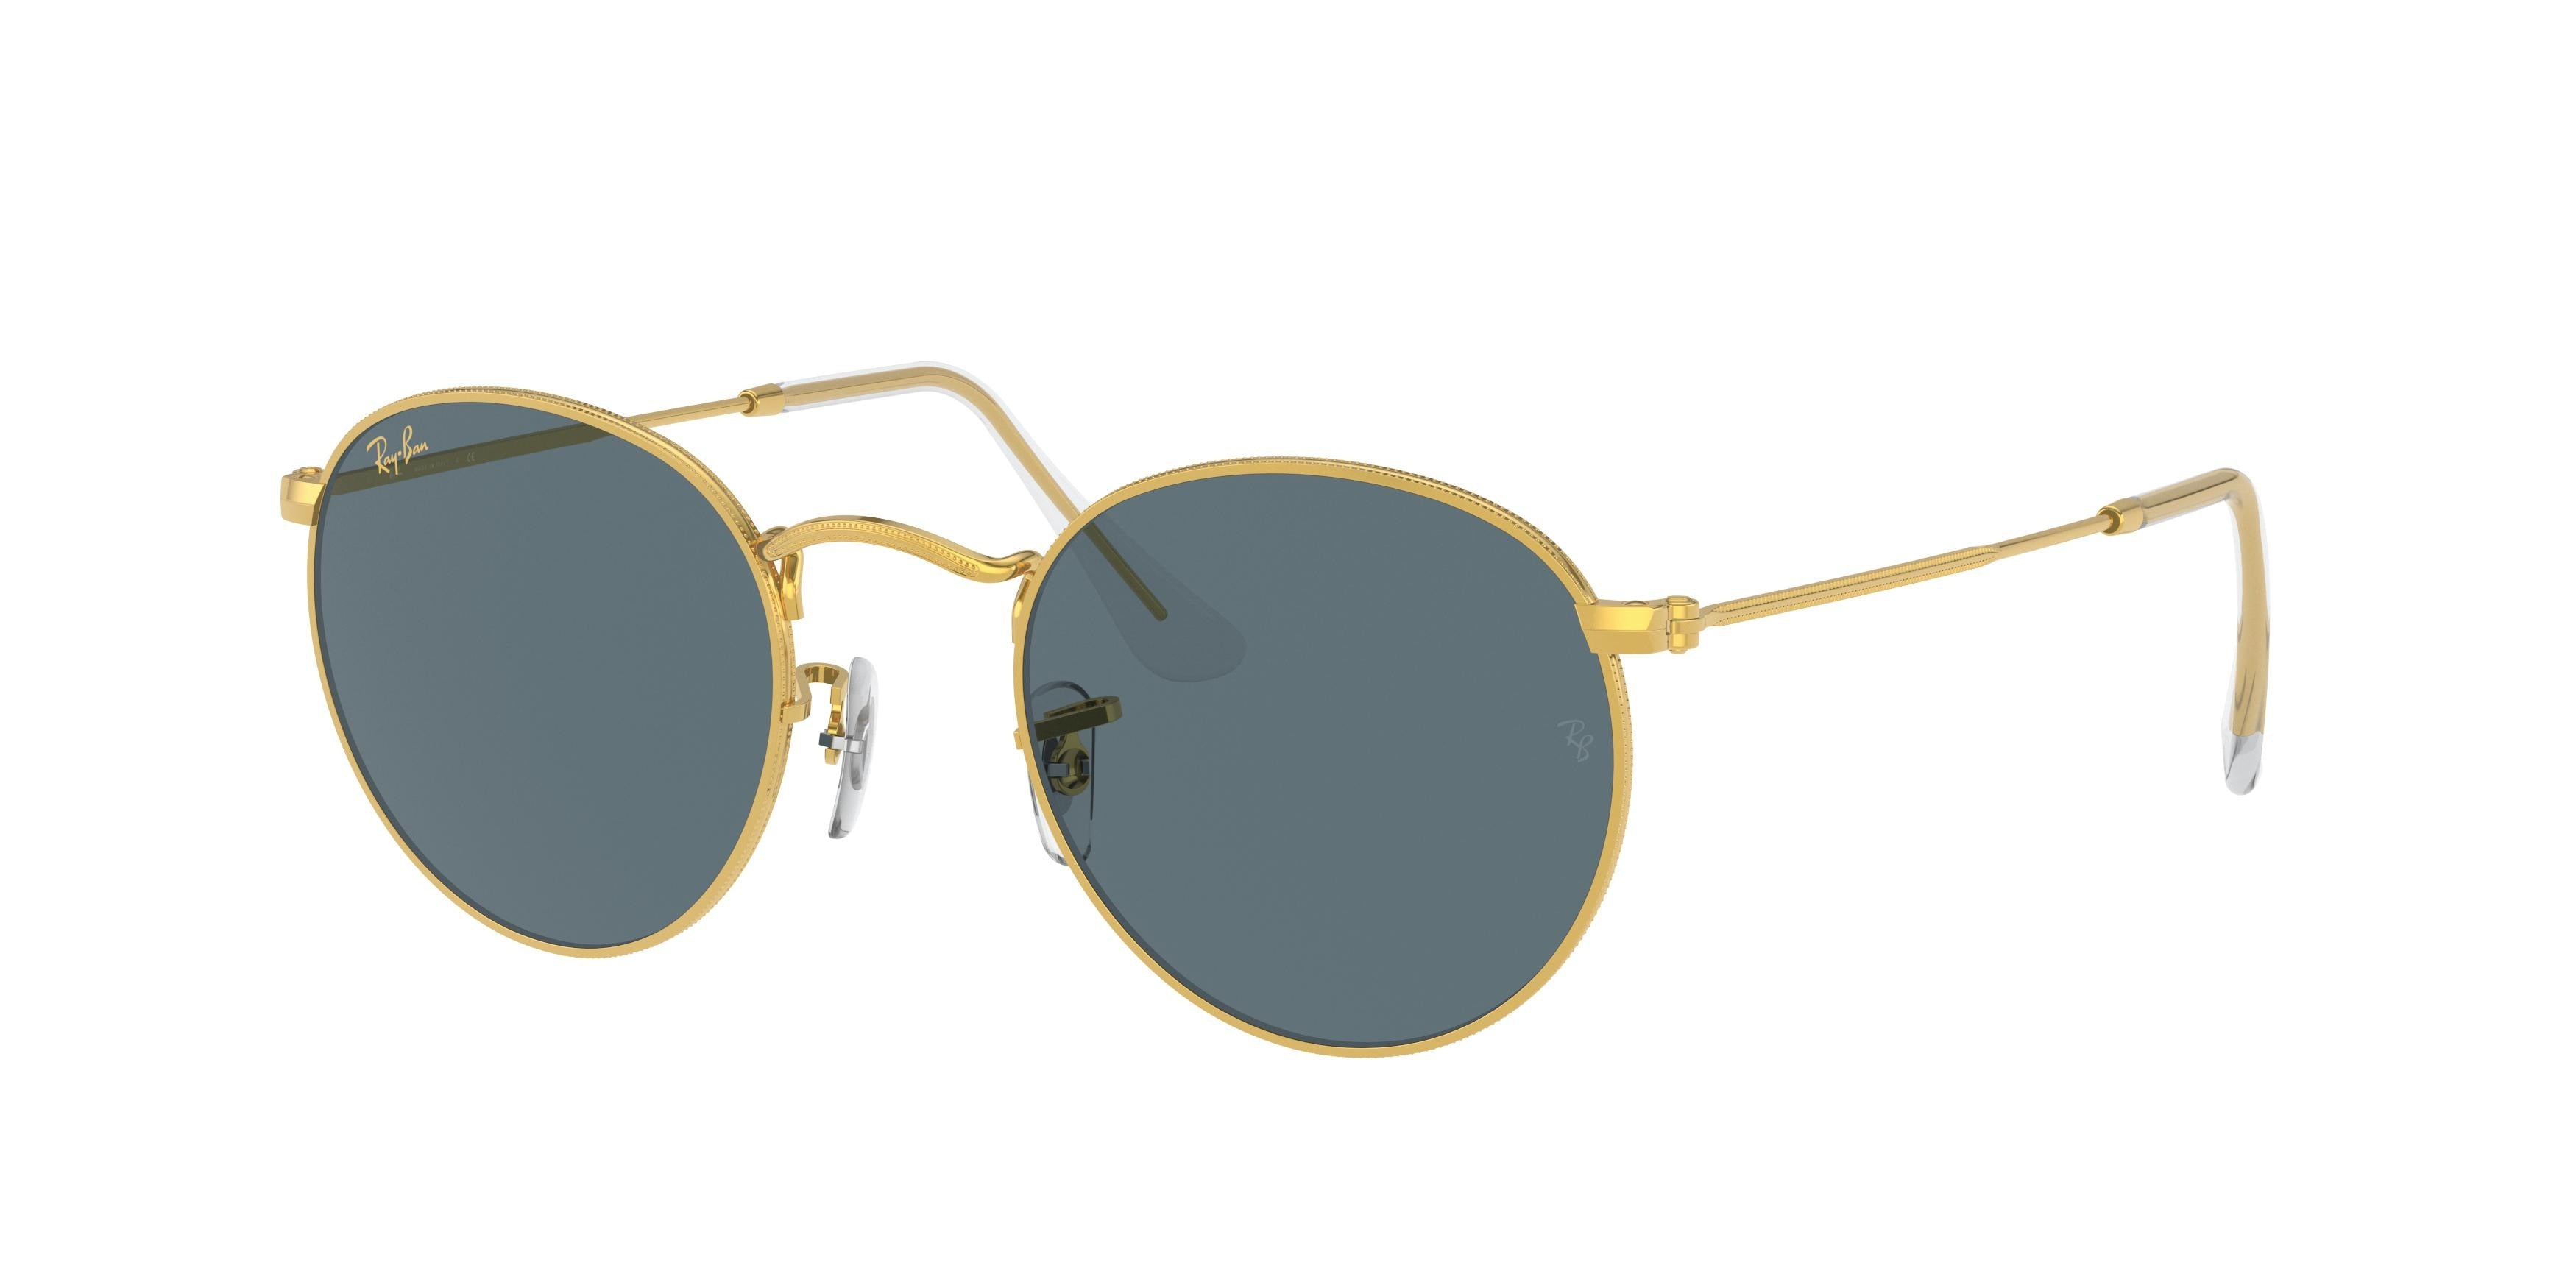 Ray-Ban ROUND METAL RB3447 Round Sunglasses  9196R5-Gold 52-145-21 - Color Map Gold